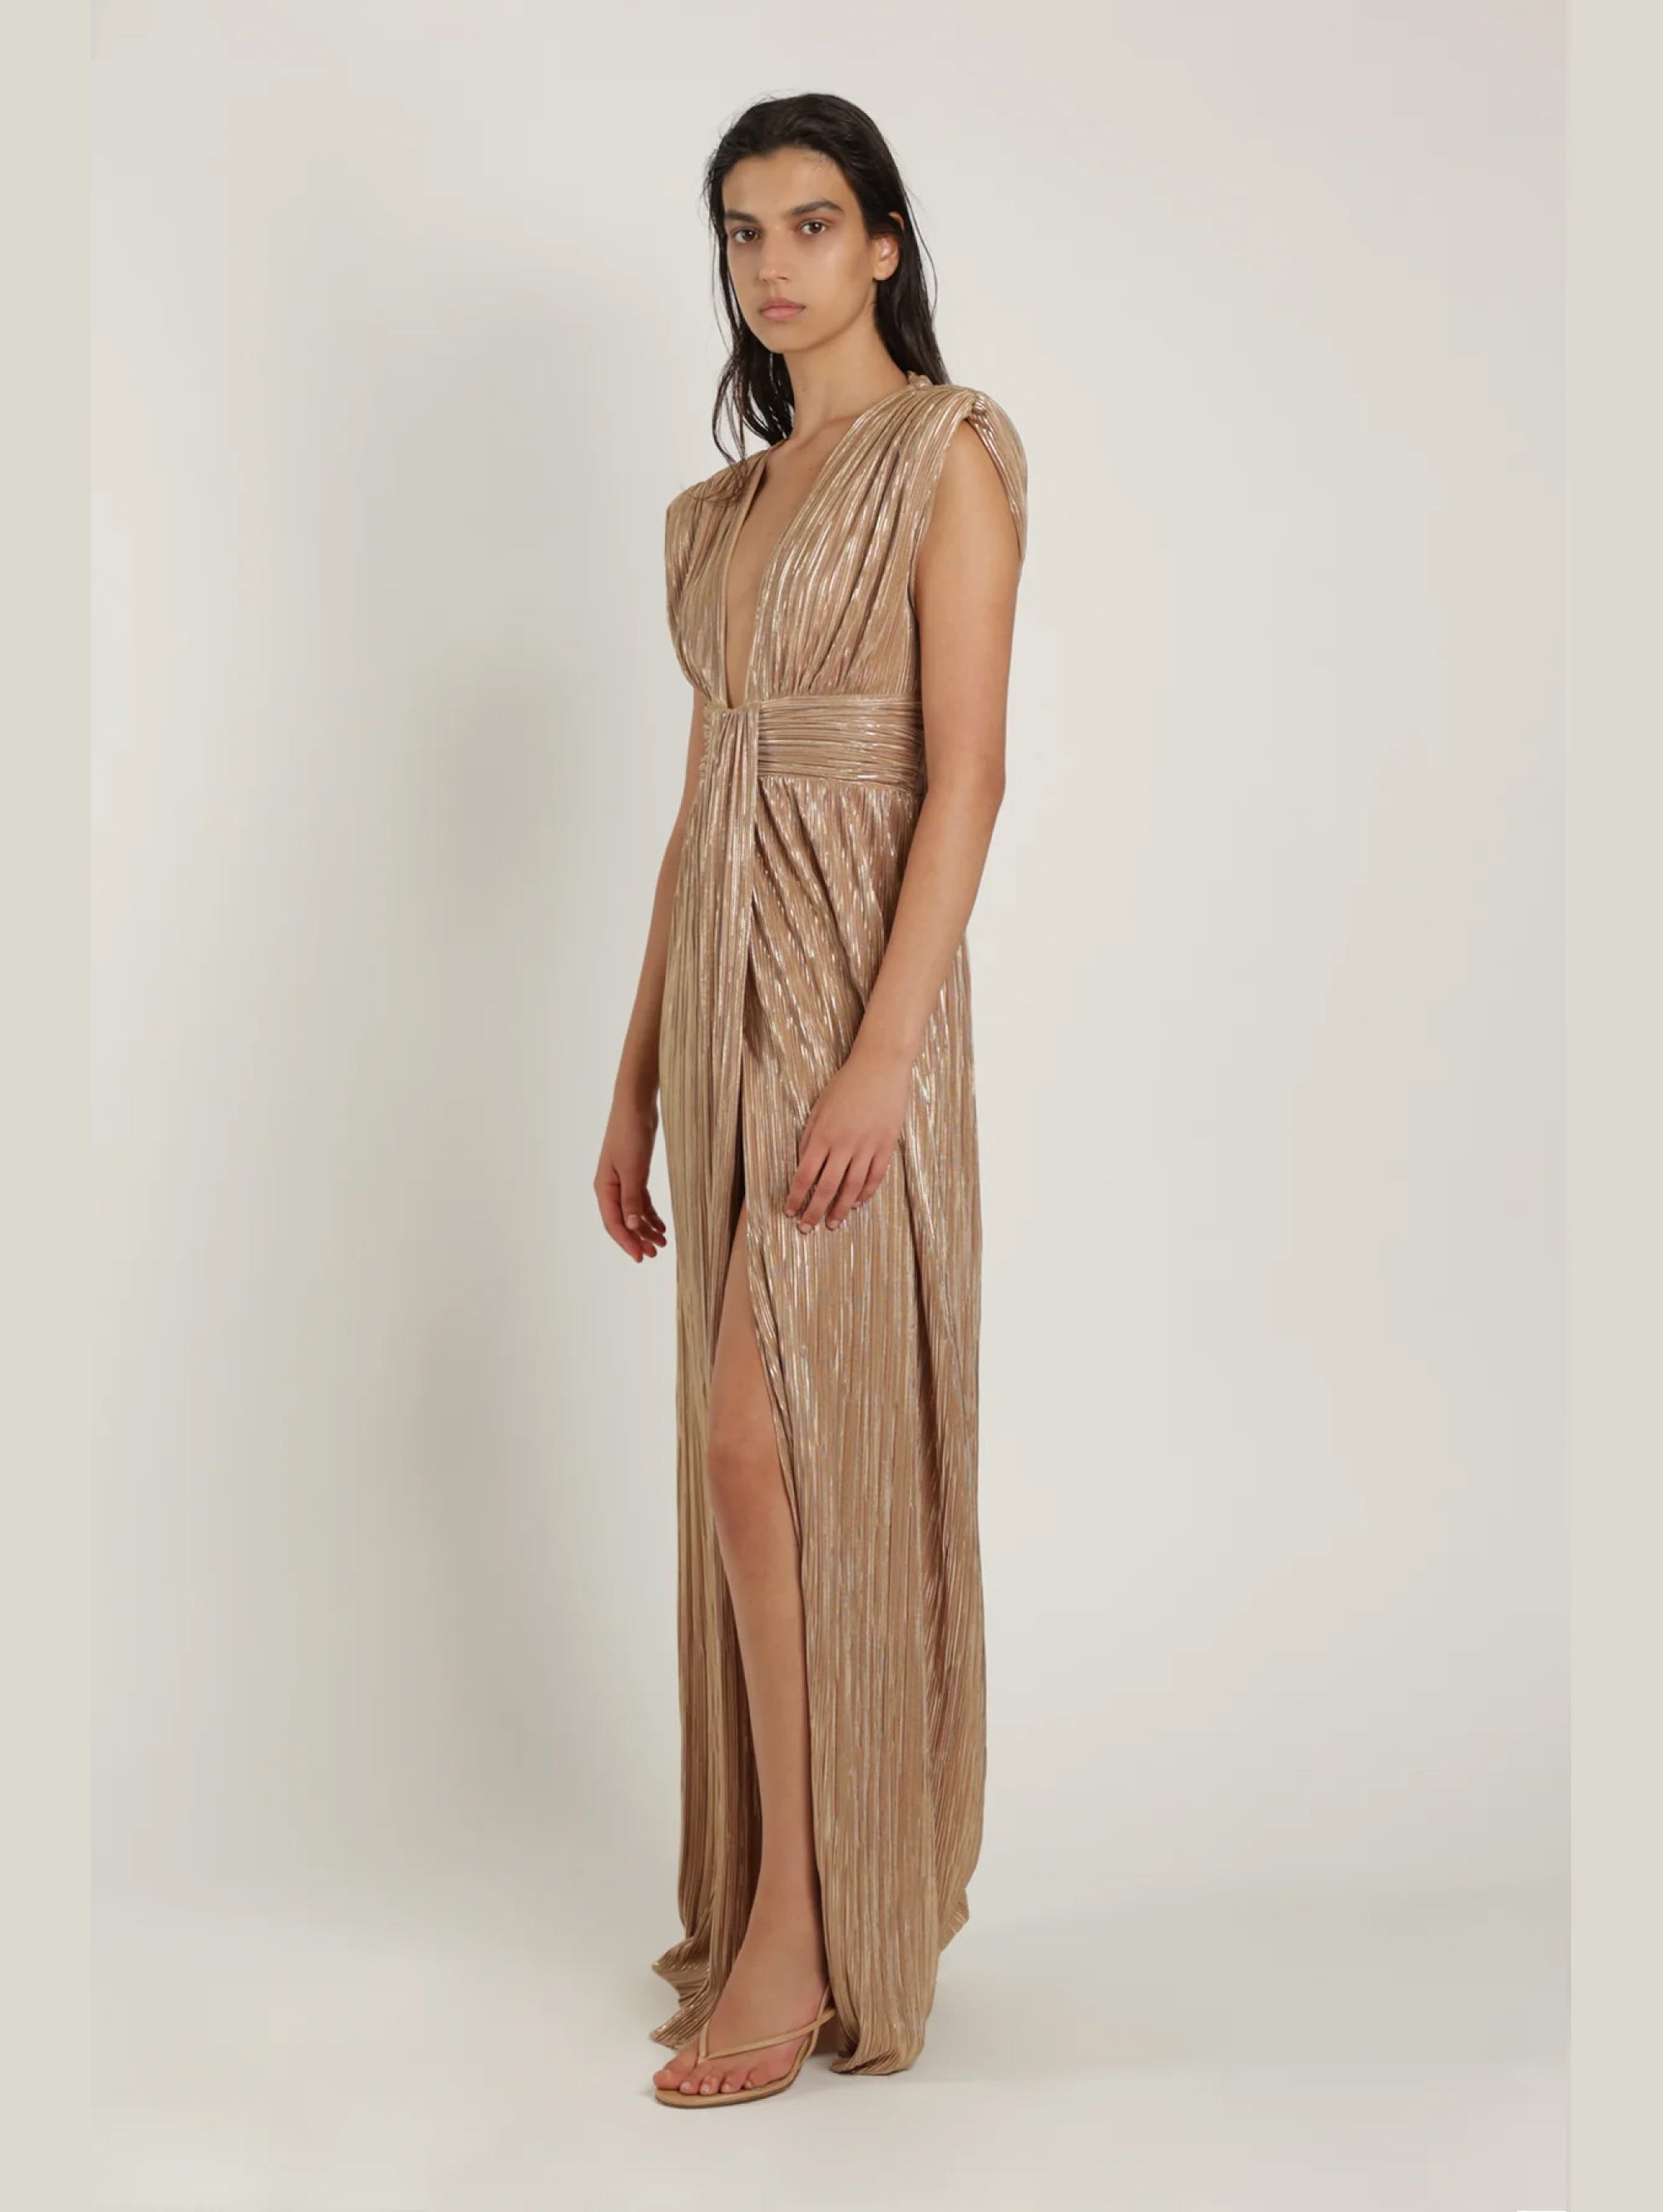 Pleated Knit Dress with Beige Draping